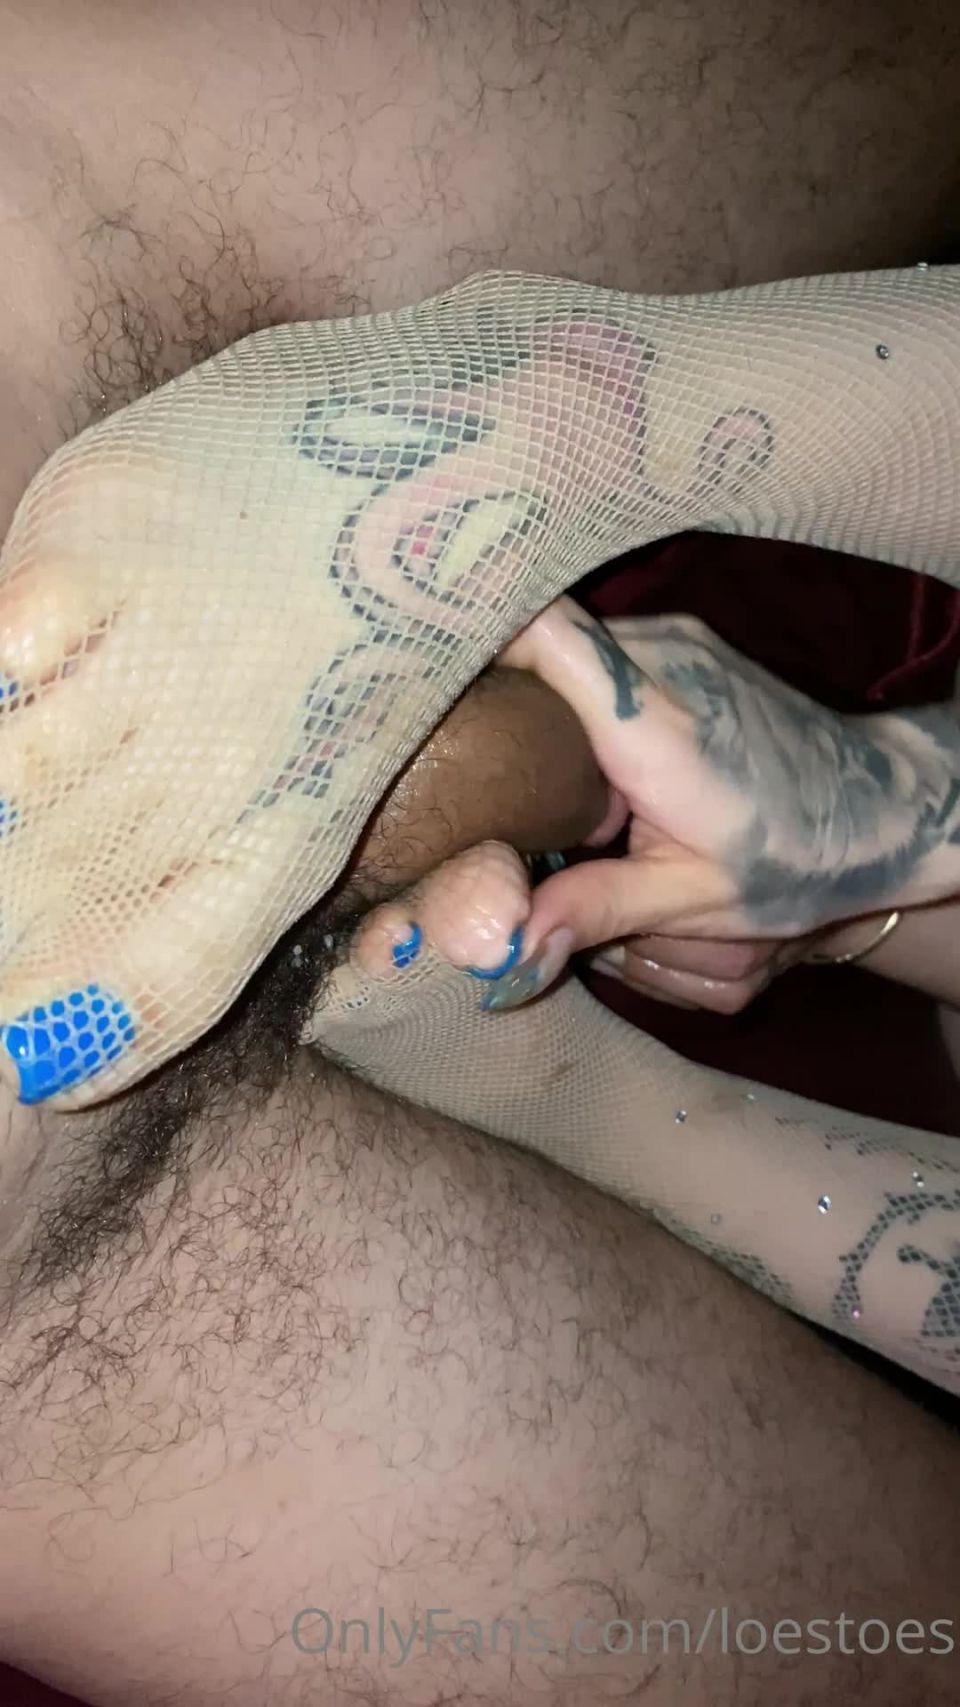 Bratty Loe - loestoes LoestoesAs promised heres the full min fj with my sexy bluets in fishnet socks whats your favo - 06-07-2020 - Onlyfans